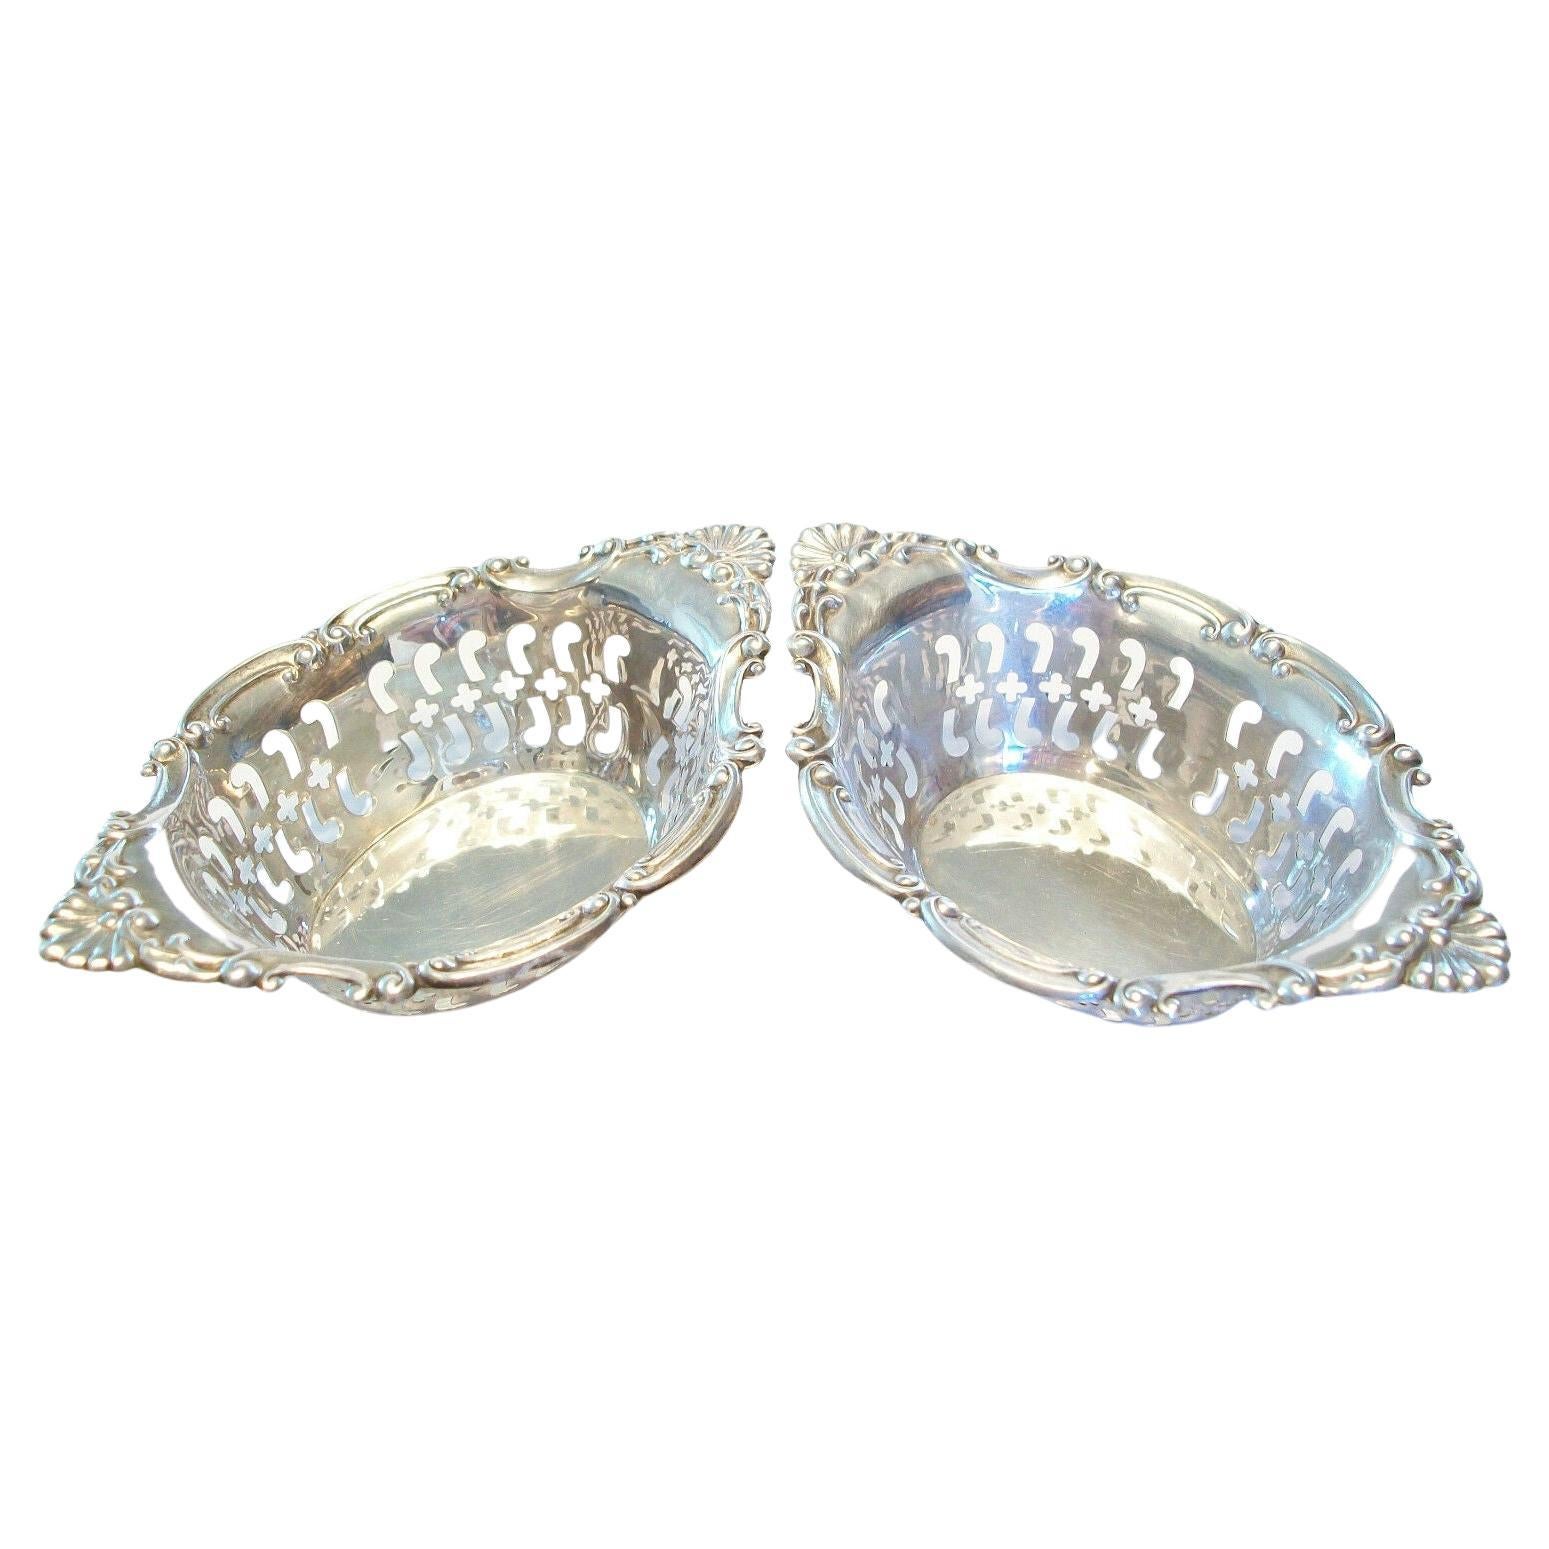 BIRKS - Pair of Pierced Sterling Silver Candy Dishes - Canada - Mid 20th Century For Sale